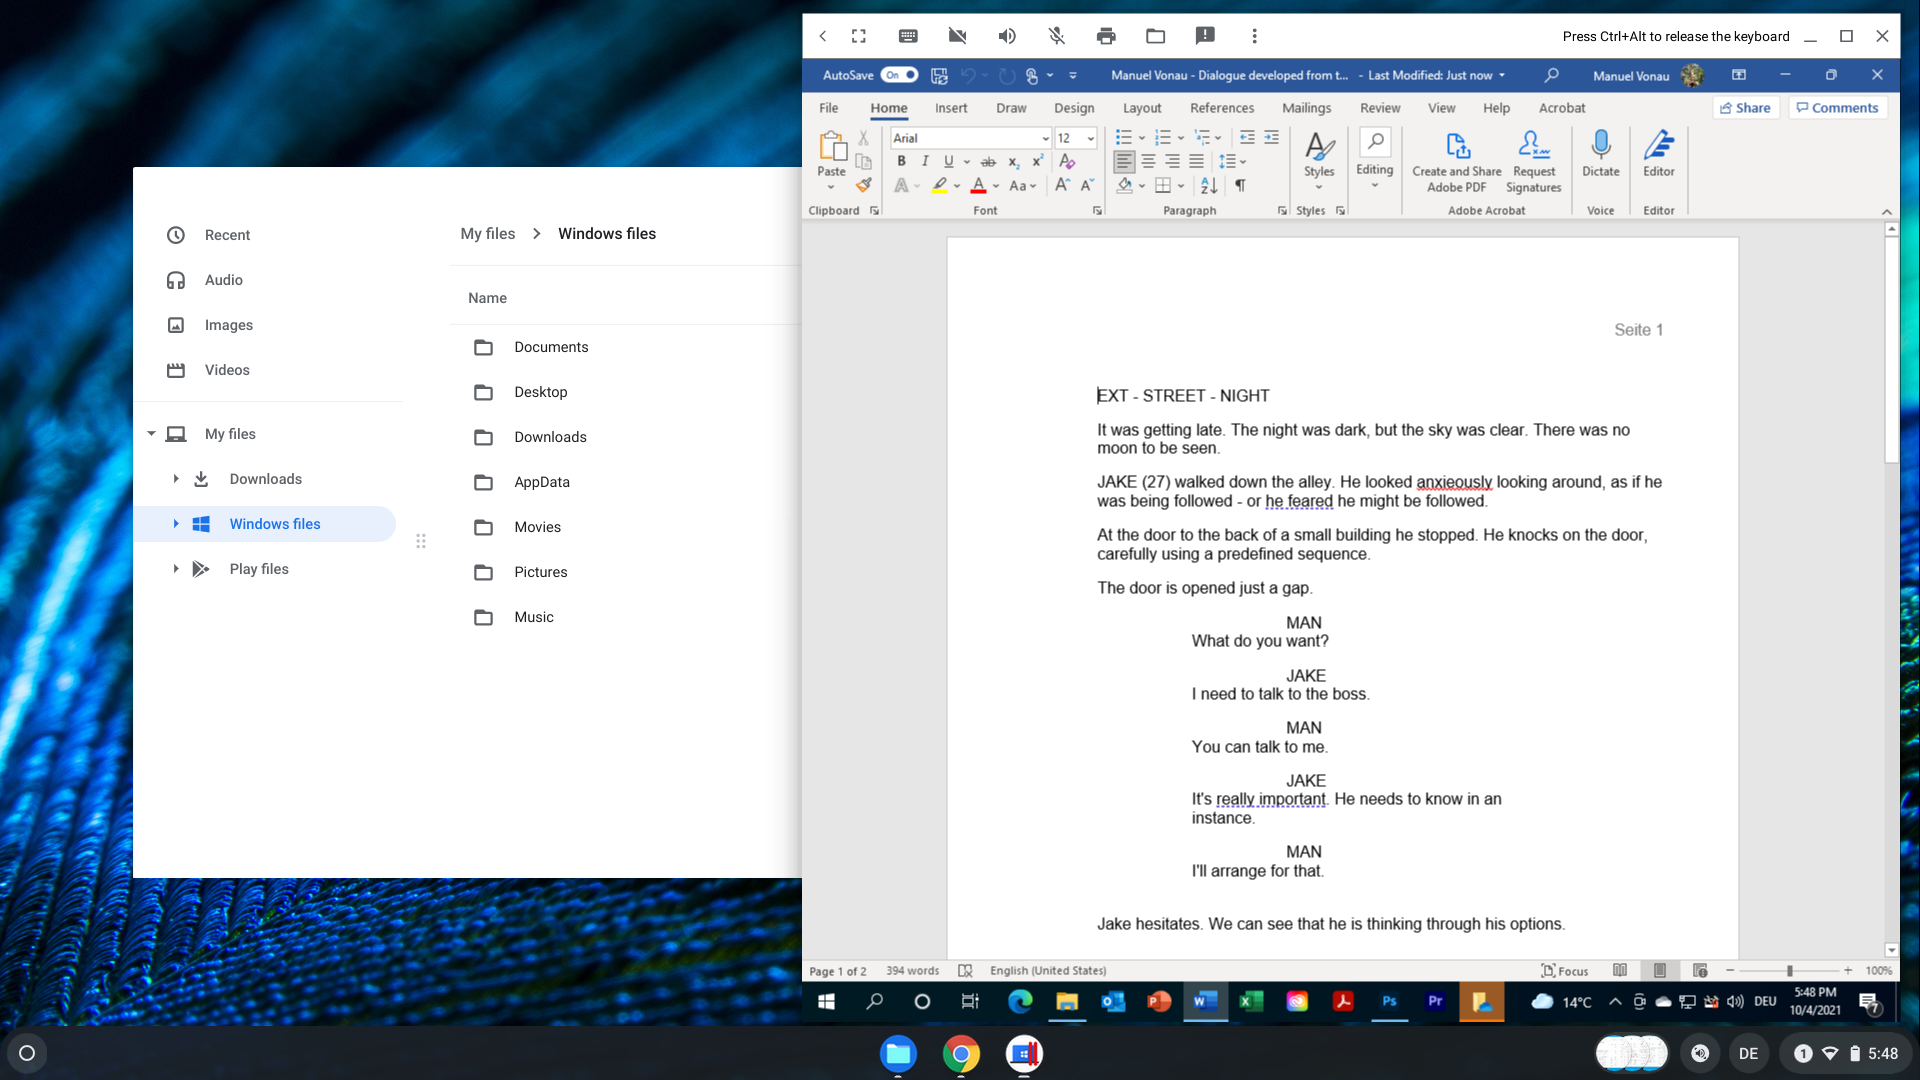 Parallels on Chrome OS Microsoft Word